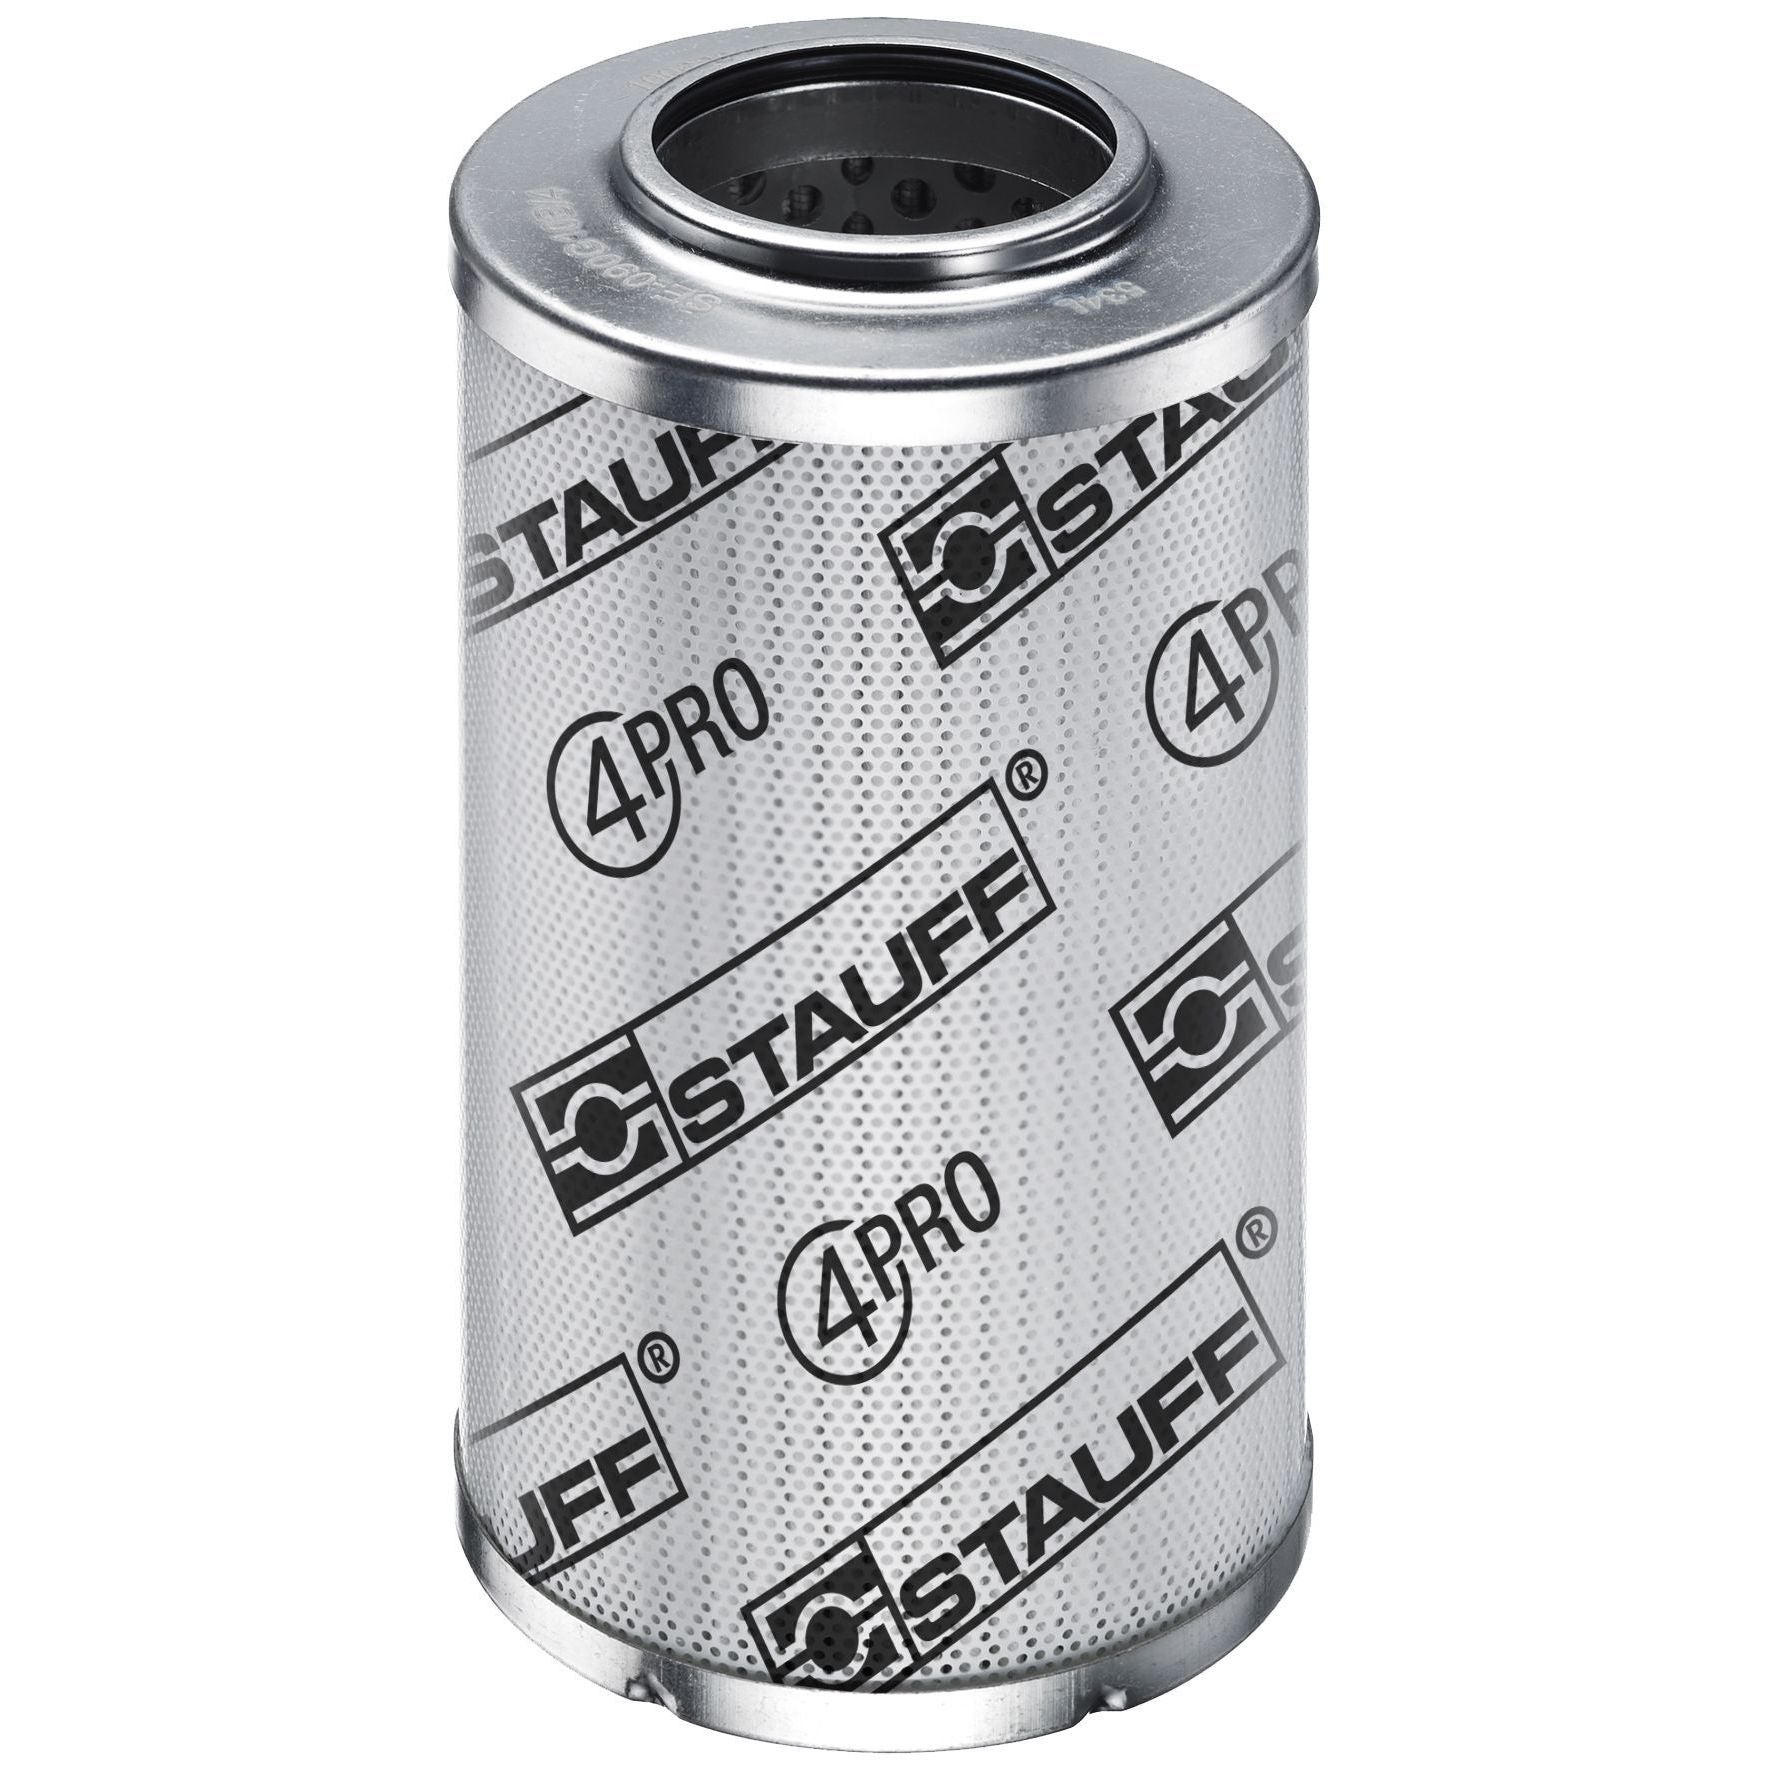 SE-090-G-20-E/4-1 : Stauff SF-090 Series Filter Element, 20 Micron, Synthetic, 363psi Collapse Differential, EPDM Seals